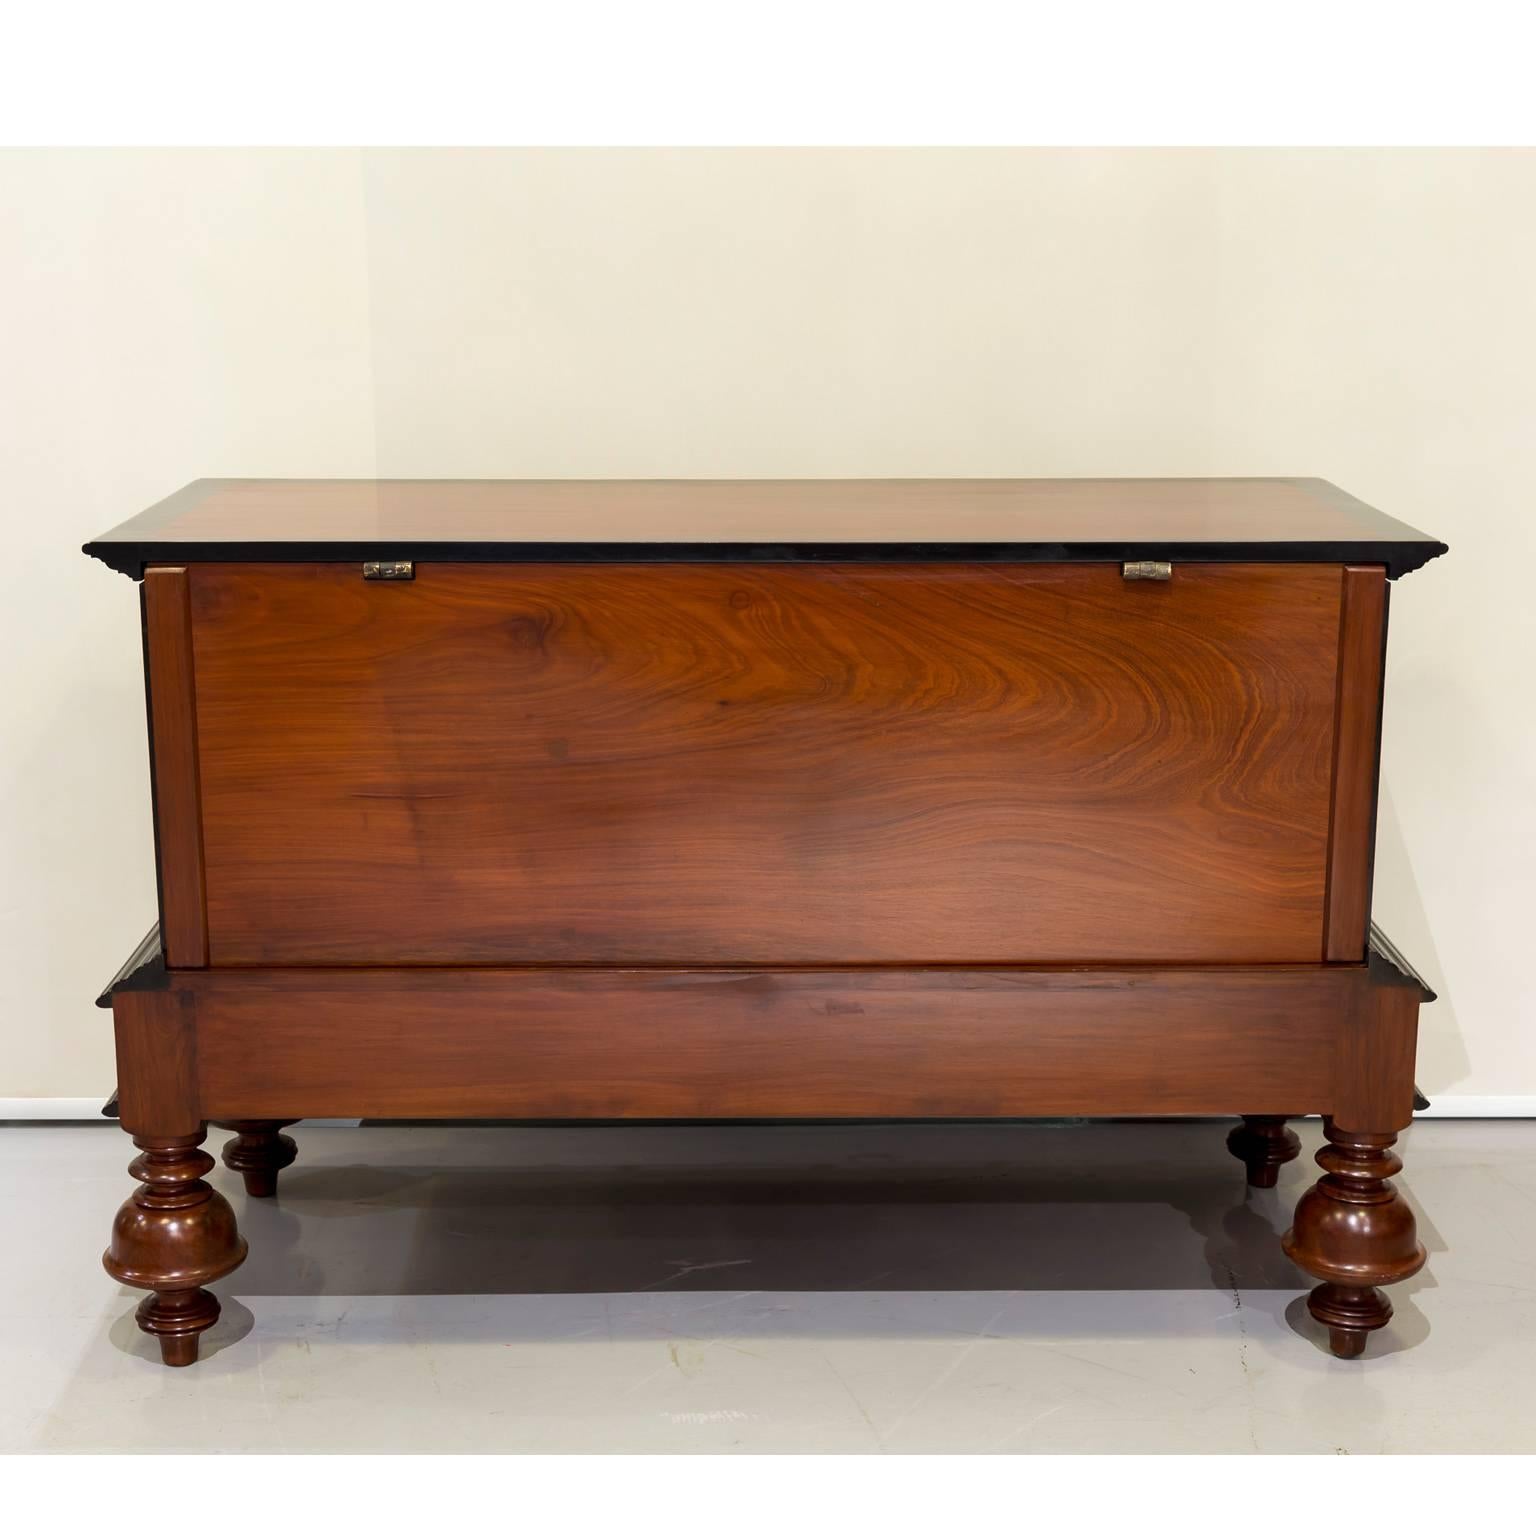 Antique Indo-Dutch or Dutch Colonial Mahogany and Ebony Chest on Stand 3